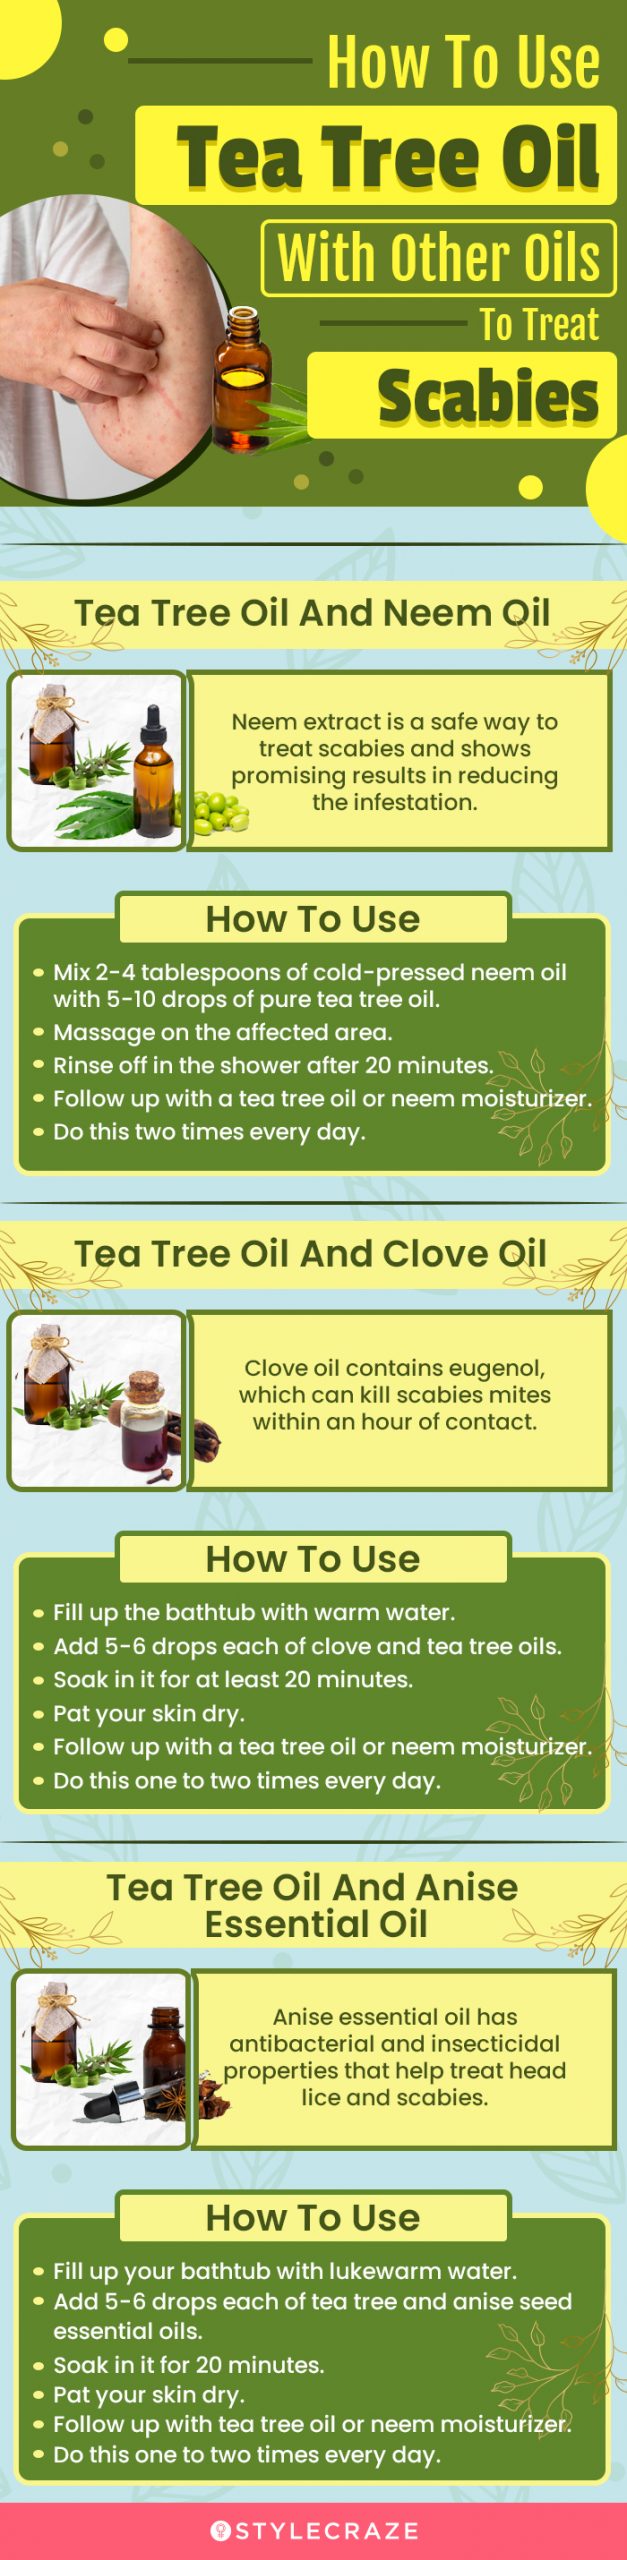 how to use tea tree oil with other oils to treat scabies(infographic)